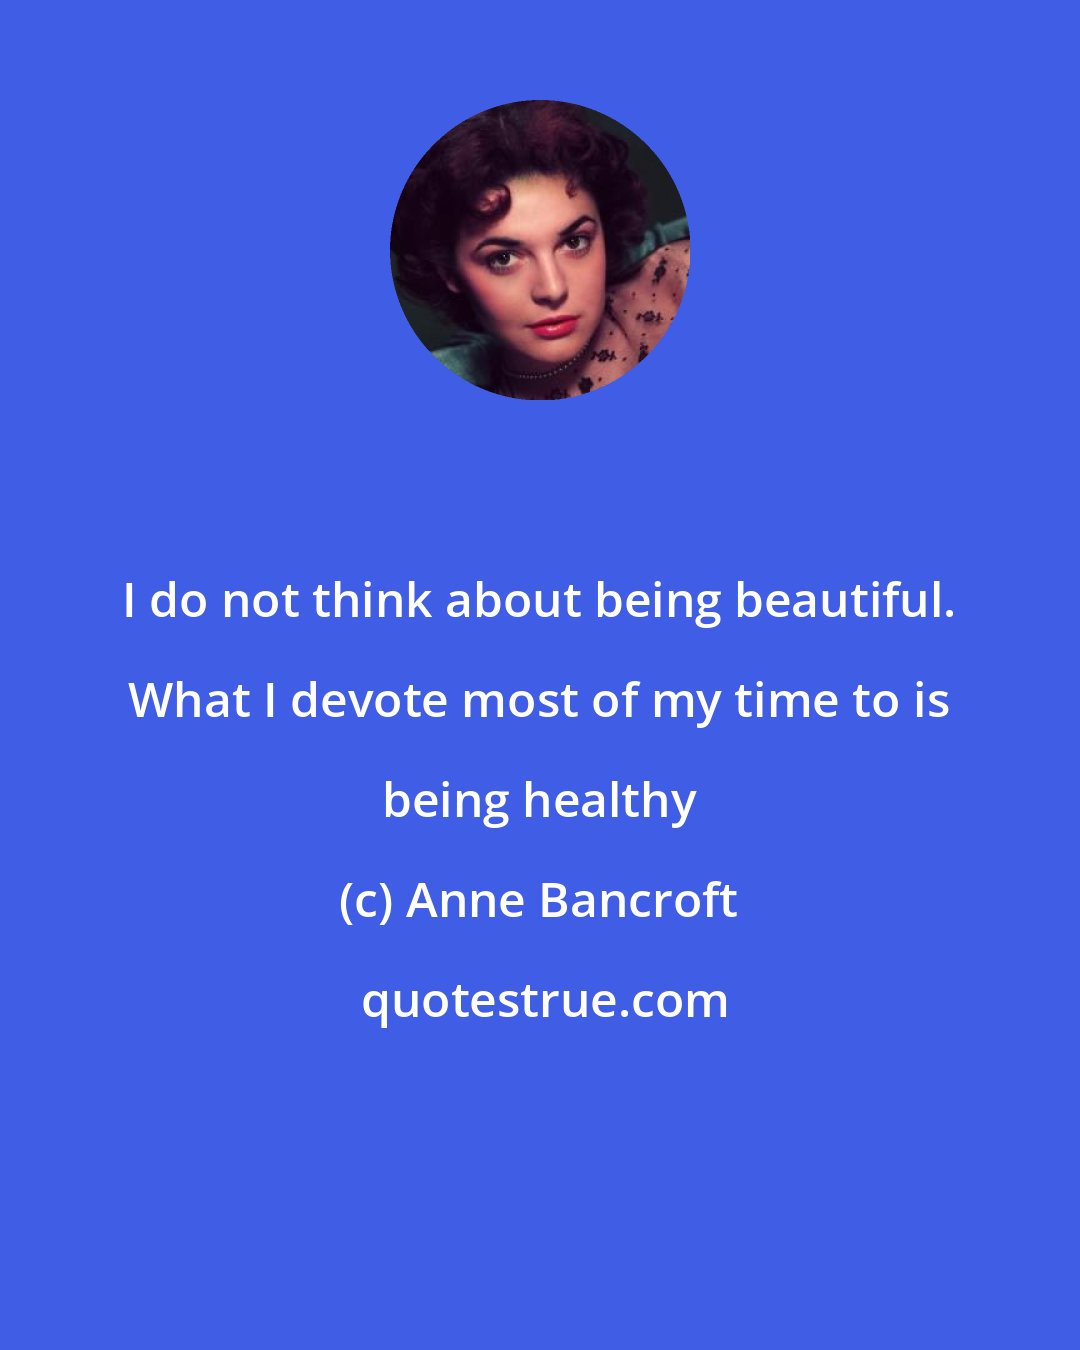 Anne Bancroft: I do not think about being beautiful. What I devote most of my time to is being healthy